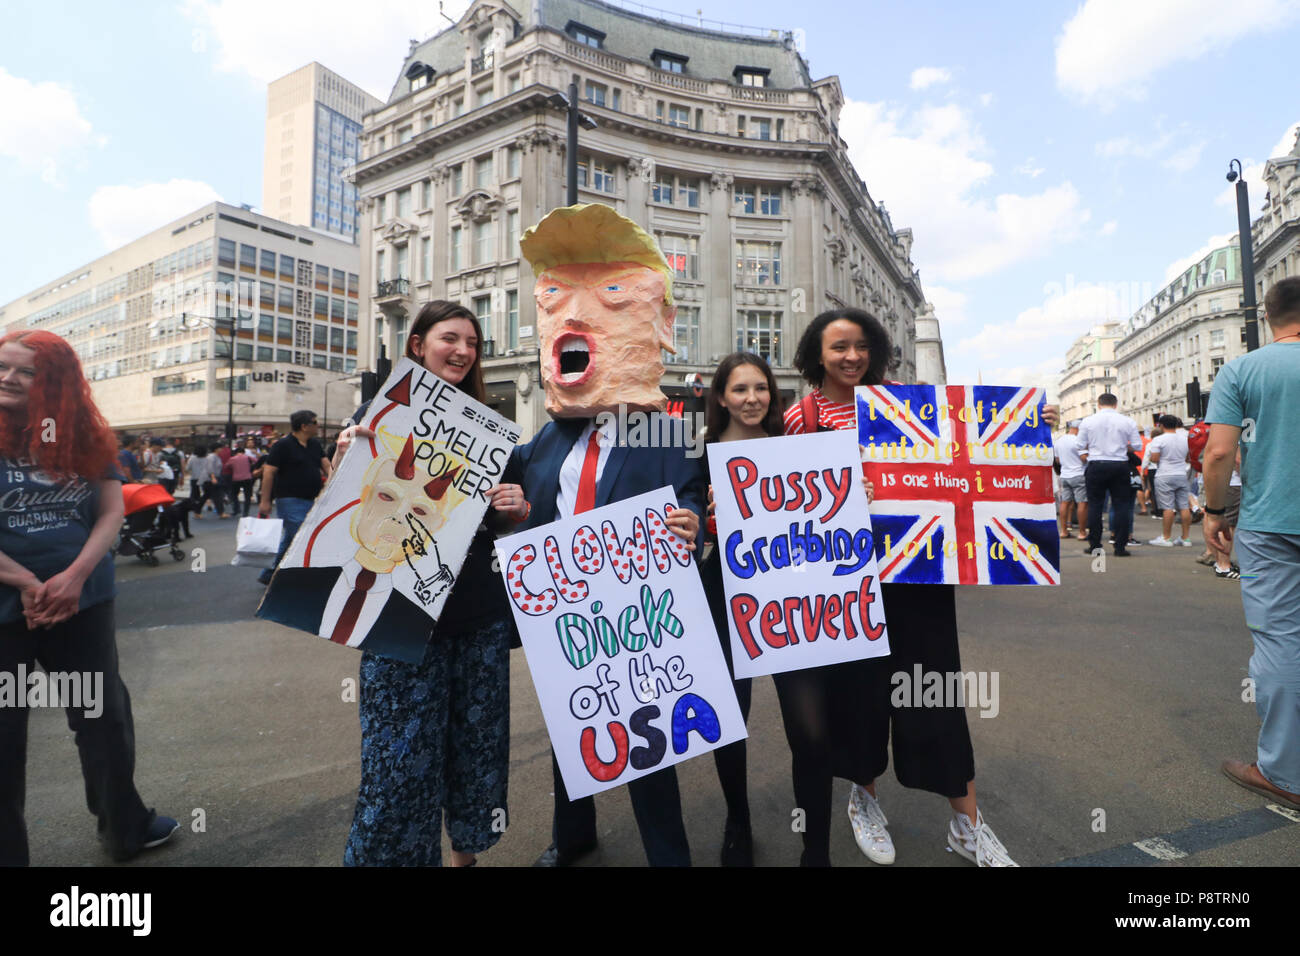 London UK. 13th July 2018.  Protesters holding placards  demonstrate  against the UK visit  of President Donald Trump as tens of thousands of protesters are expected to march to voice their displeasure against  the controversial policies of President Trump on immigration, climate change and Islamophobia. Trump dealt a double blow to U.K. Prime Minister Theresa May,criticising her plans for a soft Brexit would likely end hopes of a trade deal with the U.S. and that Boris Johnson, who quit her cabinet this week, would be a 'great' leader Credit: amer ghazzal/Alamy Live News Stock Photo